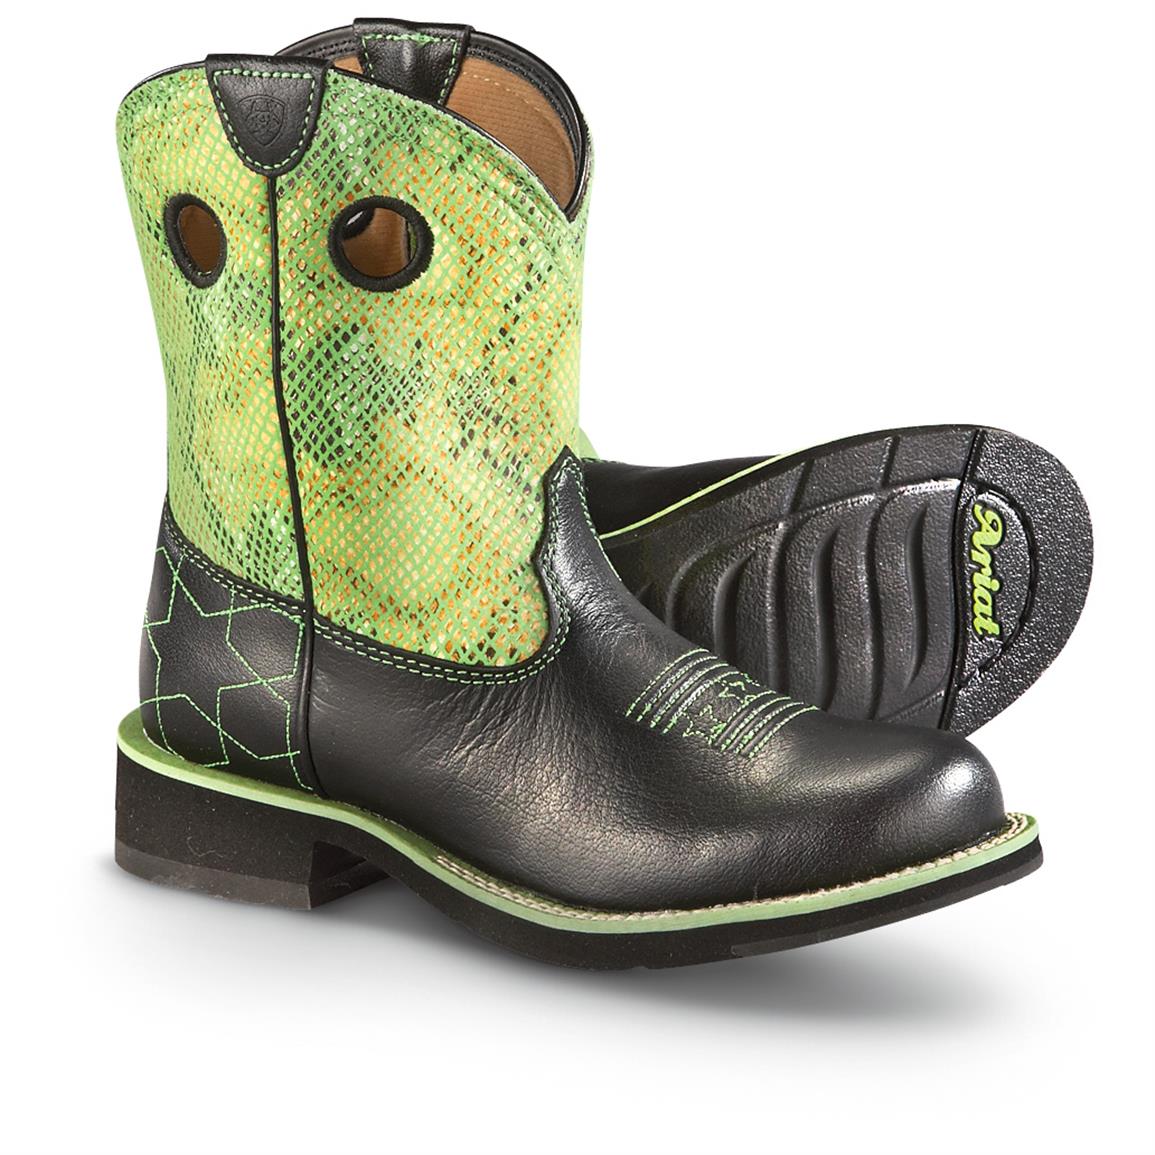 Ariat Boots For Women Clearance - Yu Boots